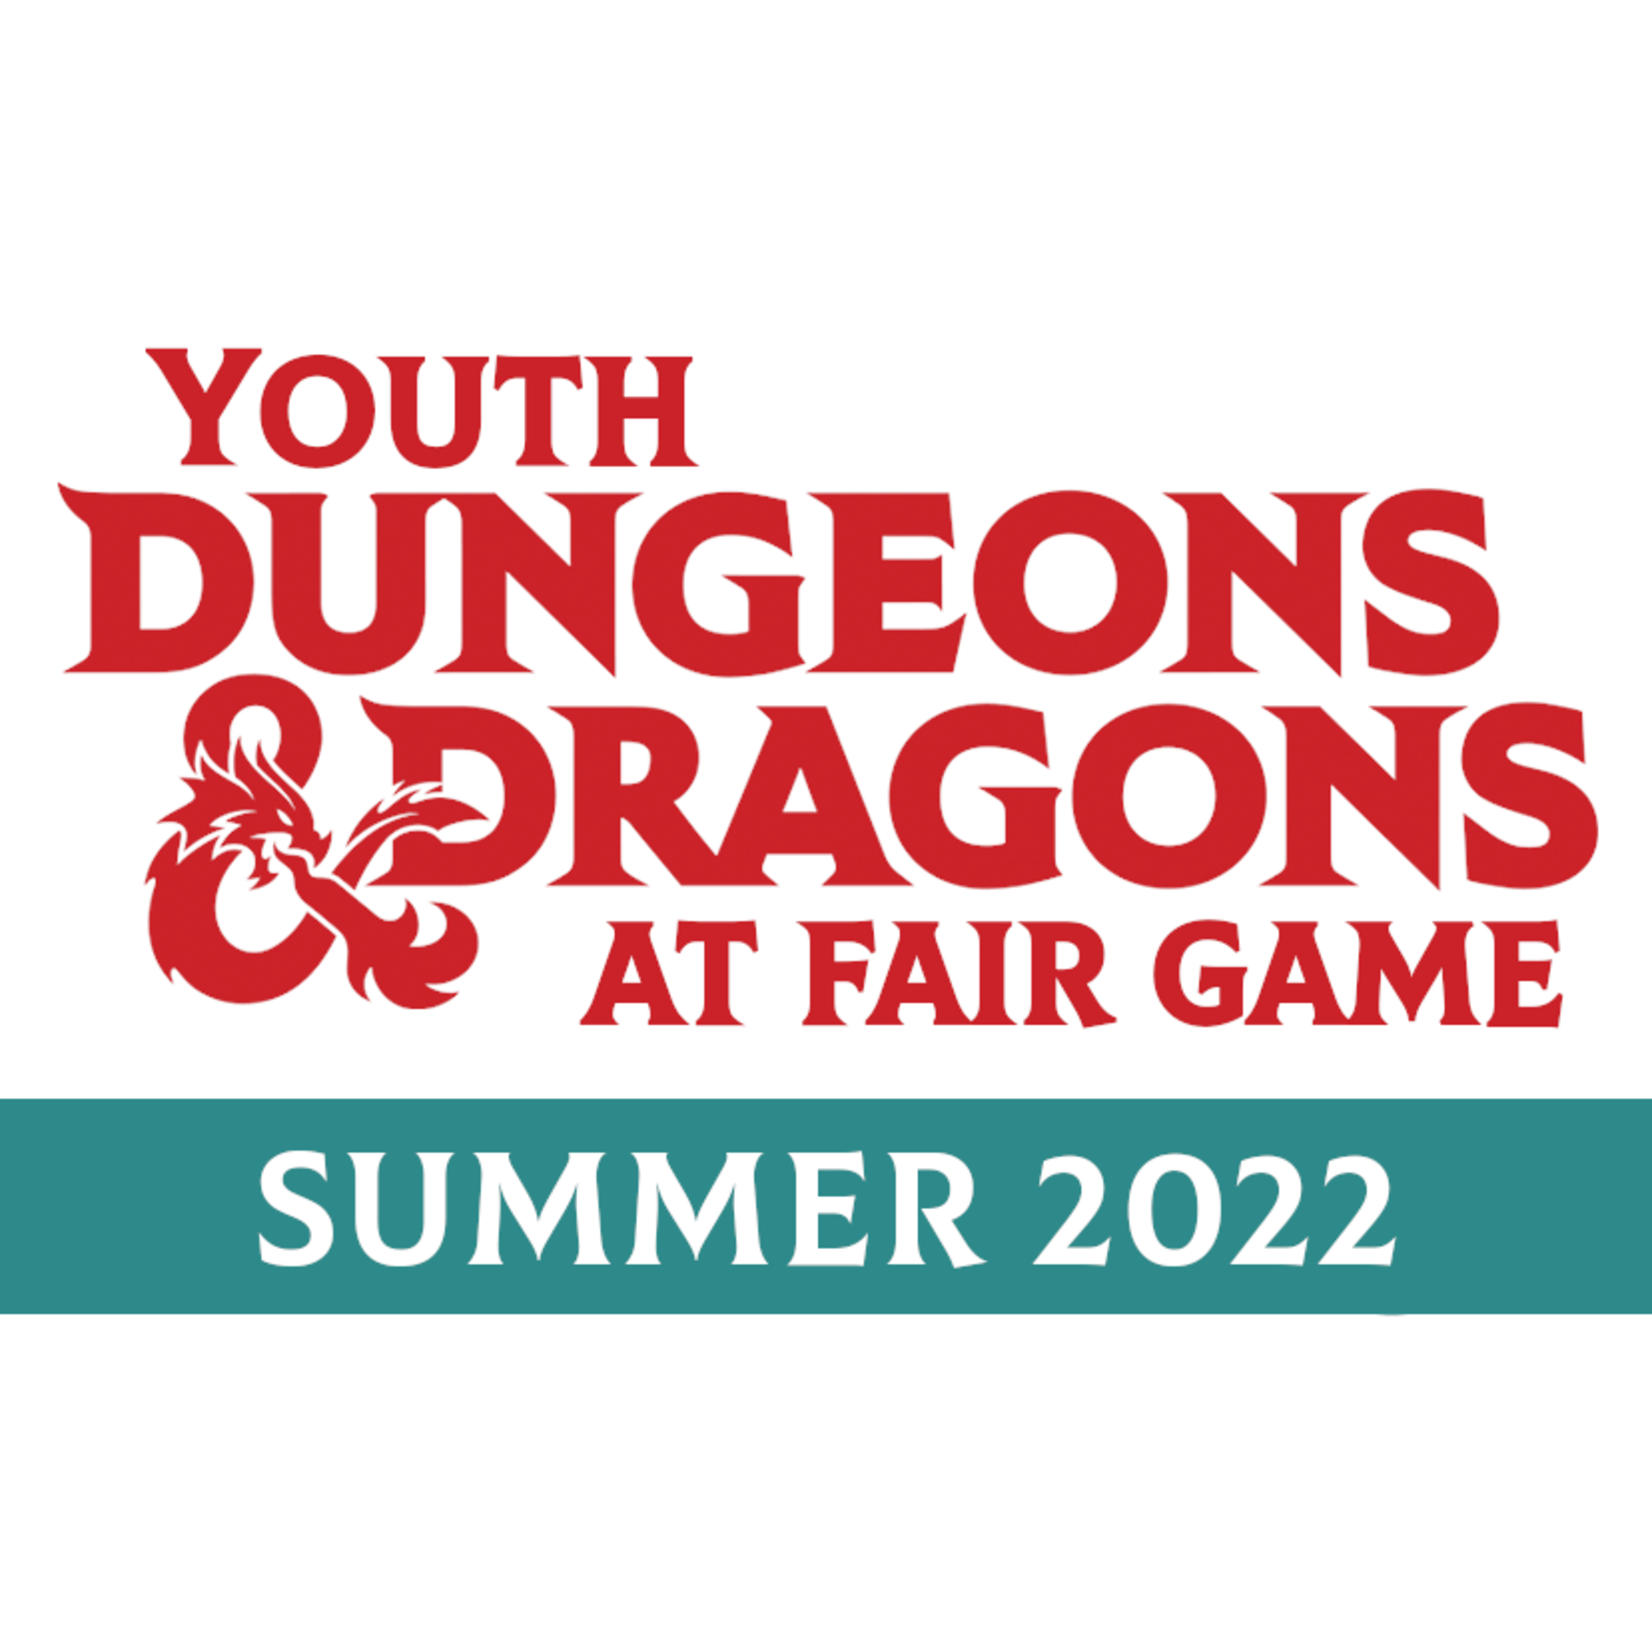 Fair Game YDND Summer 2022: Group DC1 - Downers Grove Wednesday 4-6 PM (Ages 13-17)